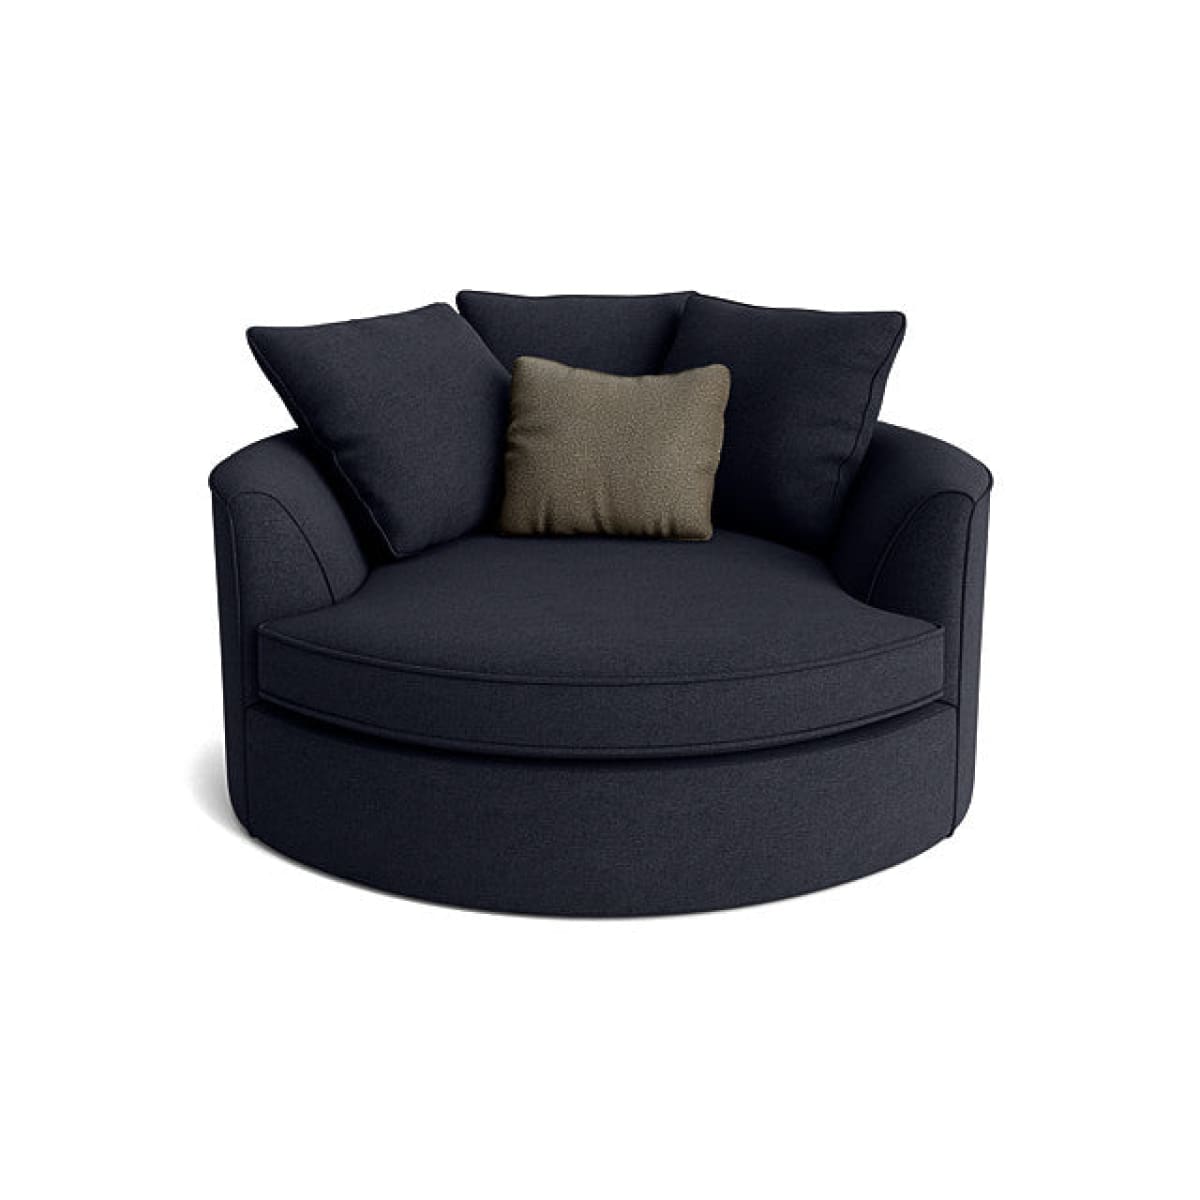 Nest Accent Chair - Entice Navy